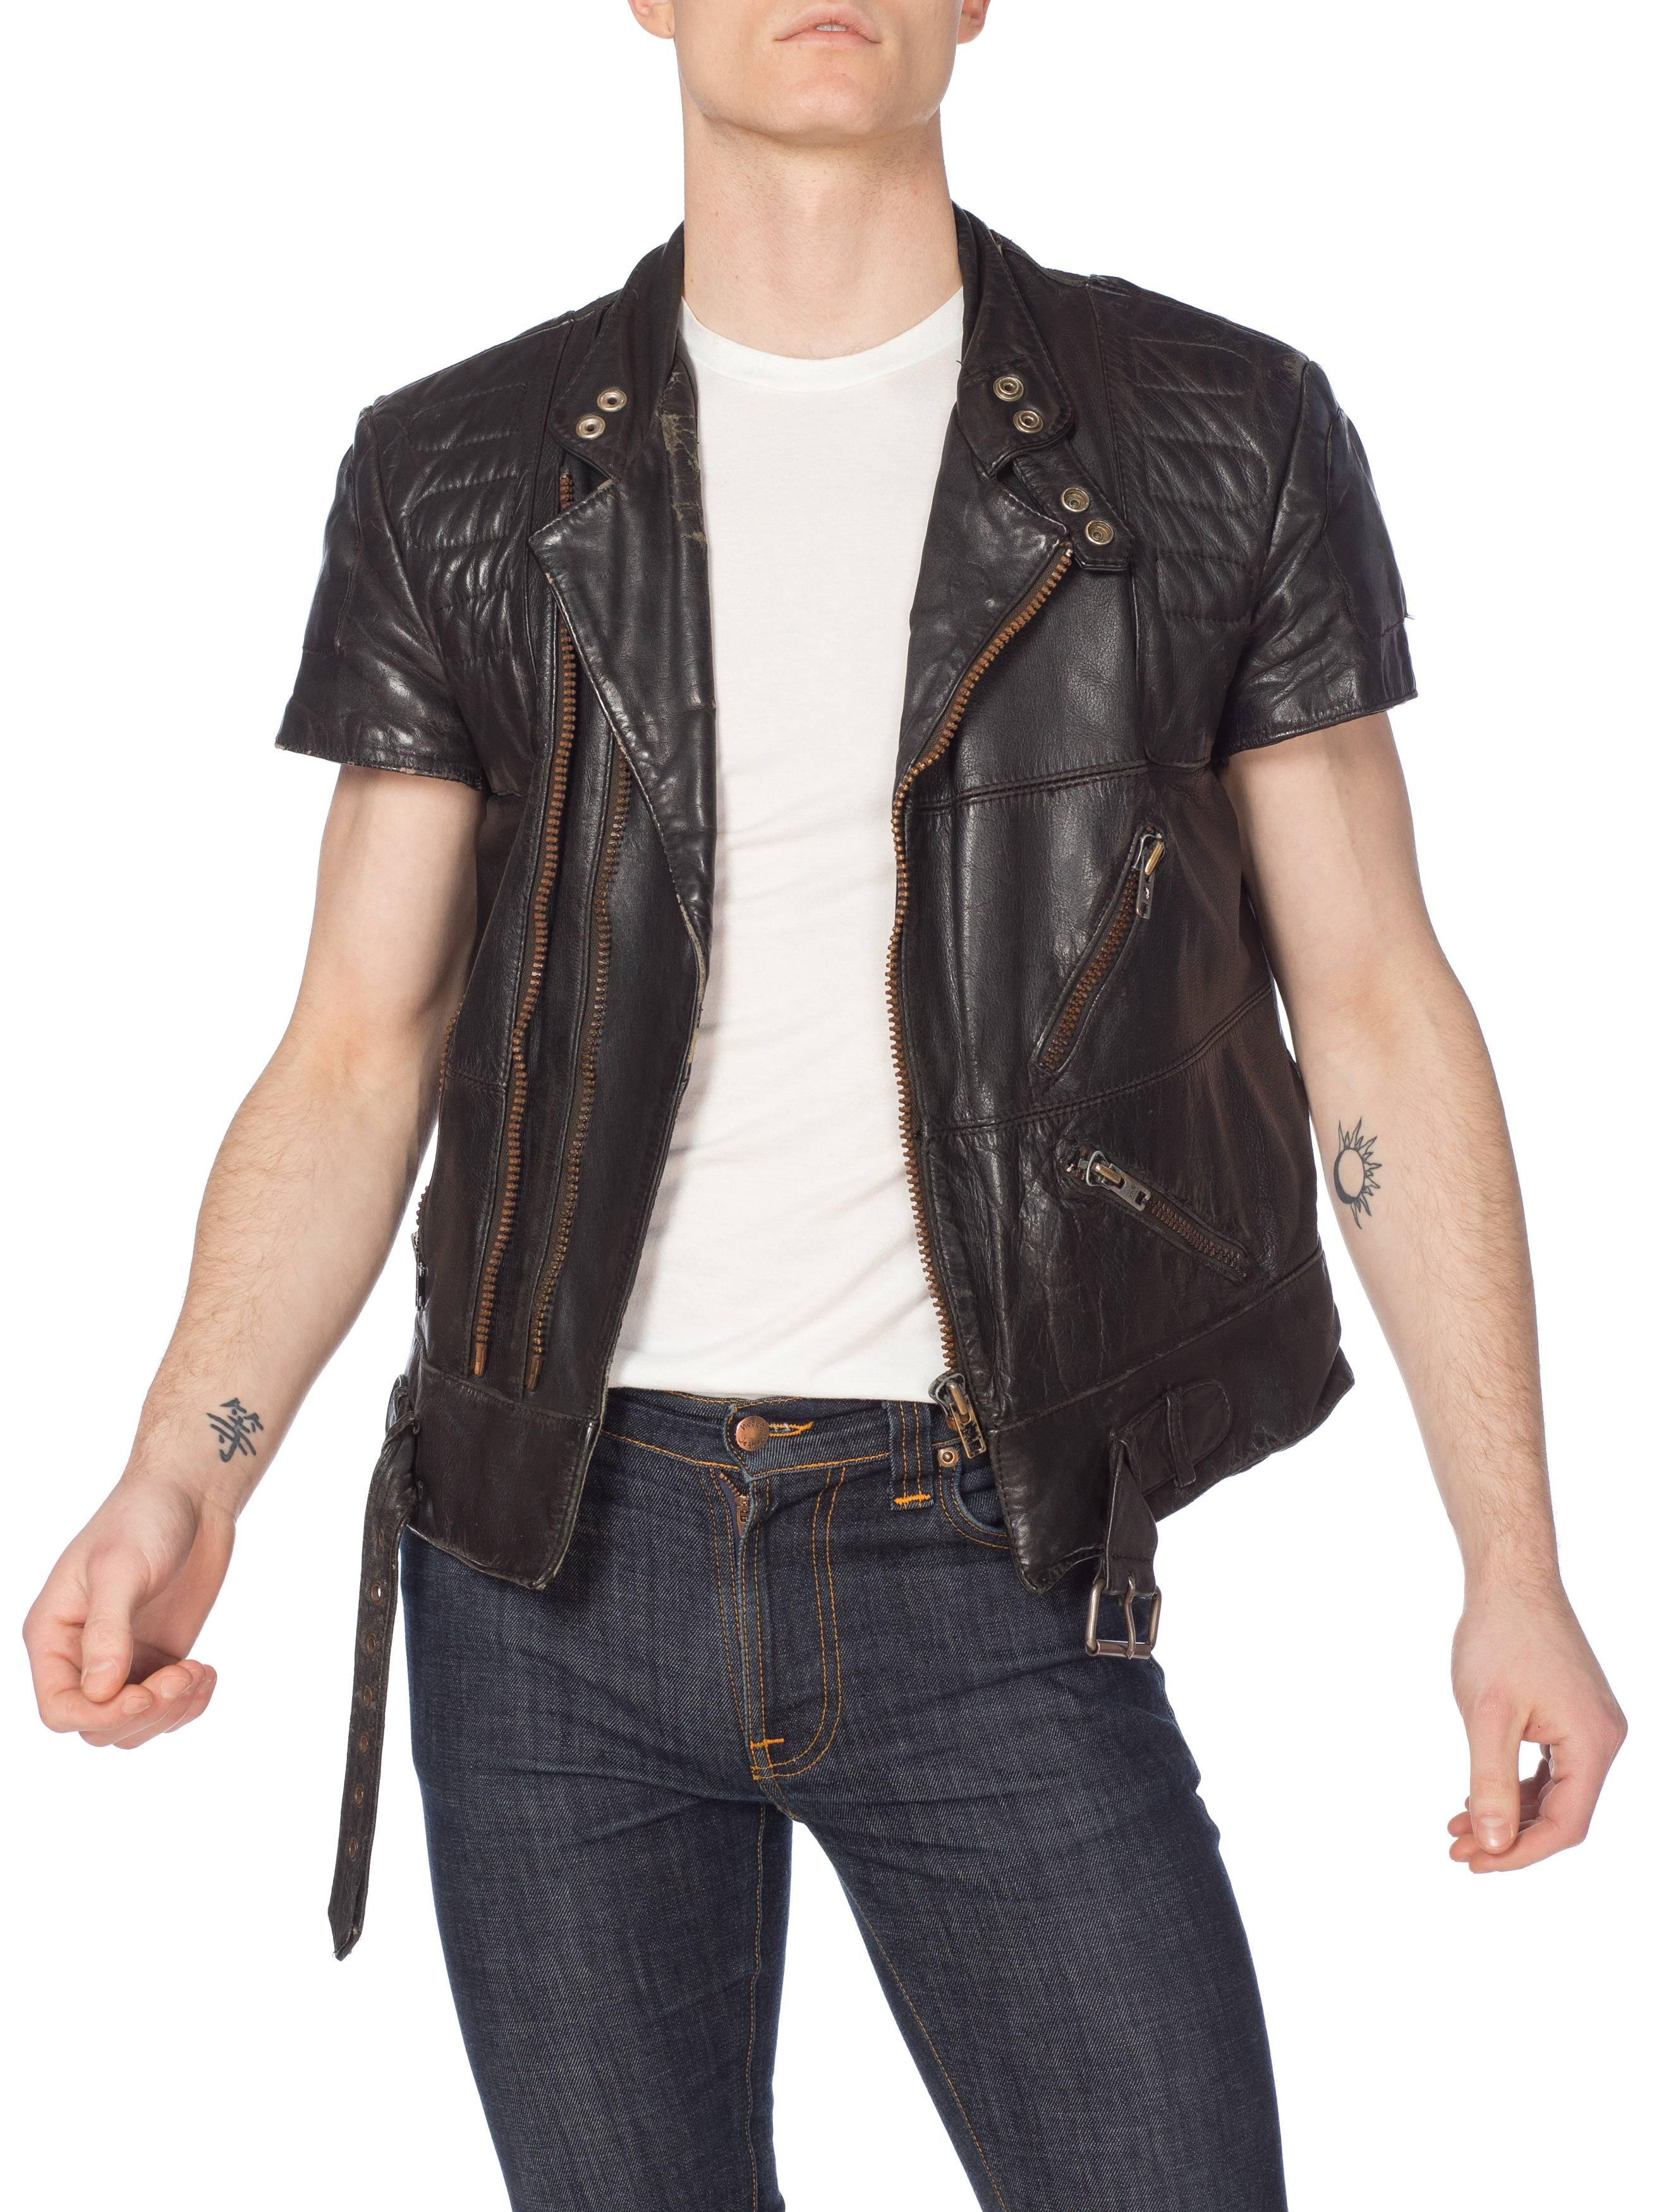 Mens Cropped Sleeve Leather Biker Jacket Formerly Belonging to the Band Justice 2